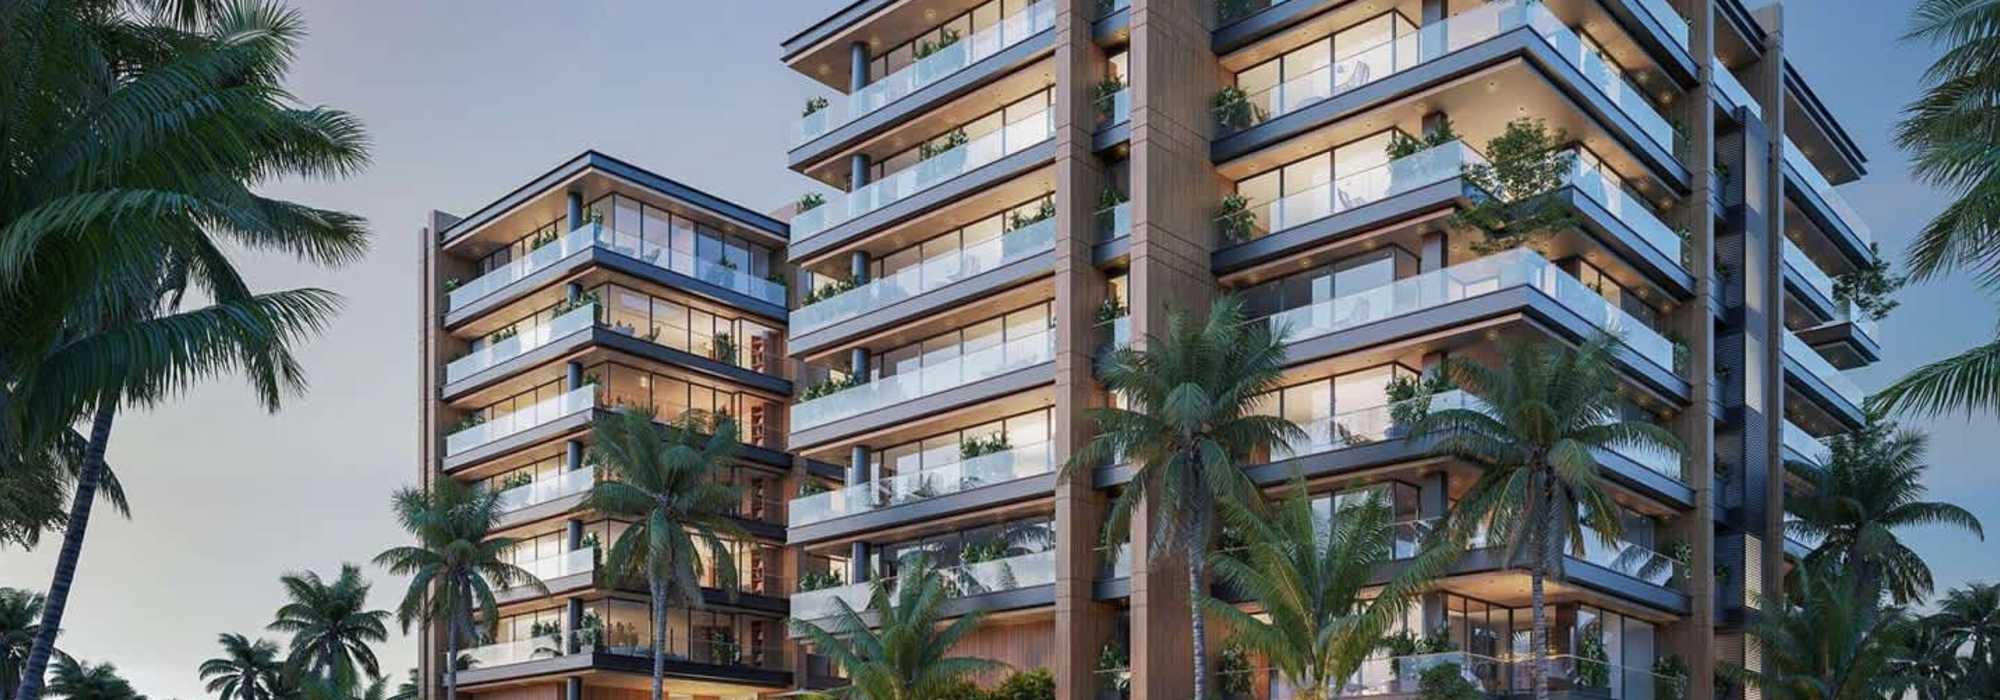 IS SOLD EXCLUSIVE QUINTESSENCE PROJECT IN SANTA MARIA